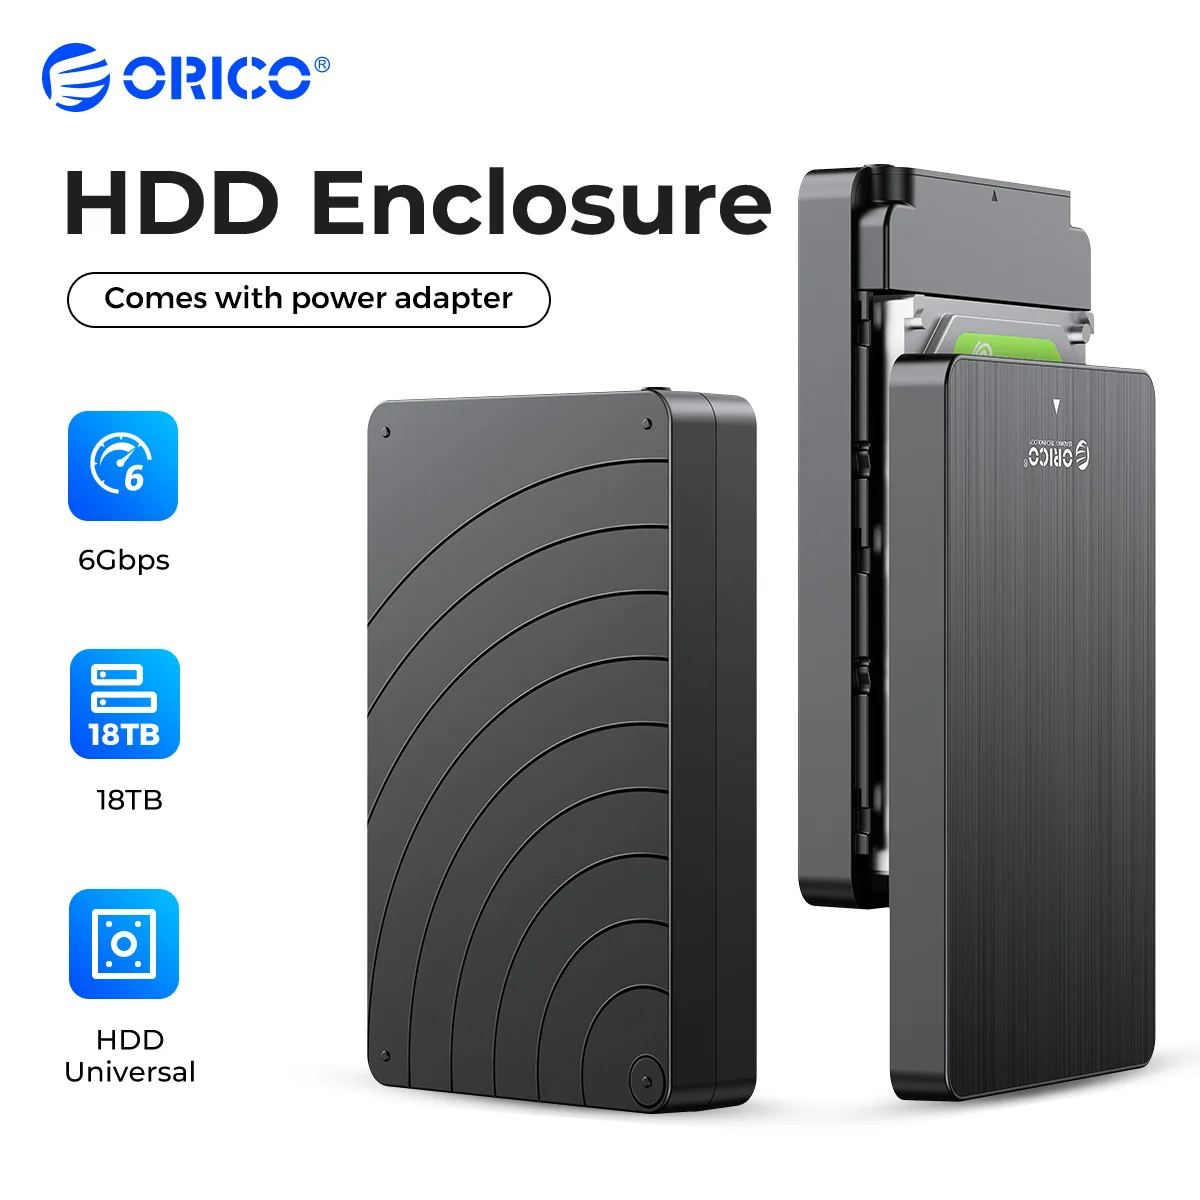 

ORICO 6Gbps HDD Case 2.5 inch SATA to USB 3.1 Hard Drive Enclosure Compatible 7mm-9.5mm 2.5" SATA III / II / I HDD and SSD Box